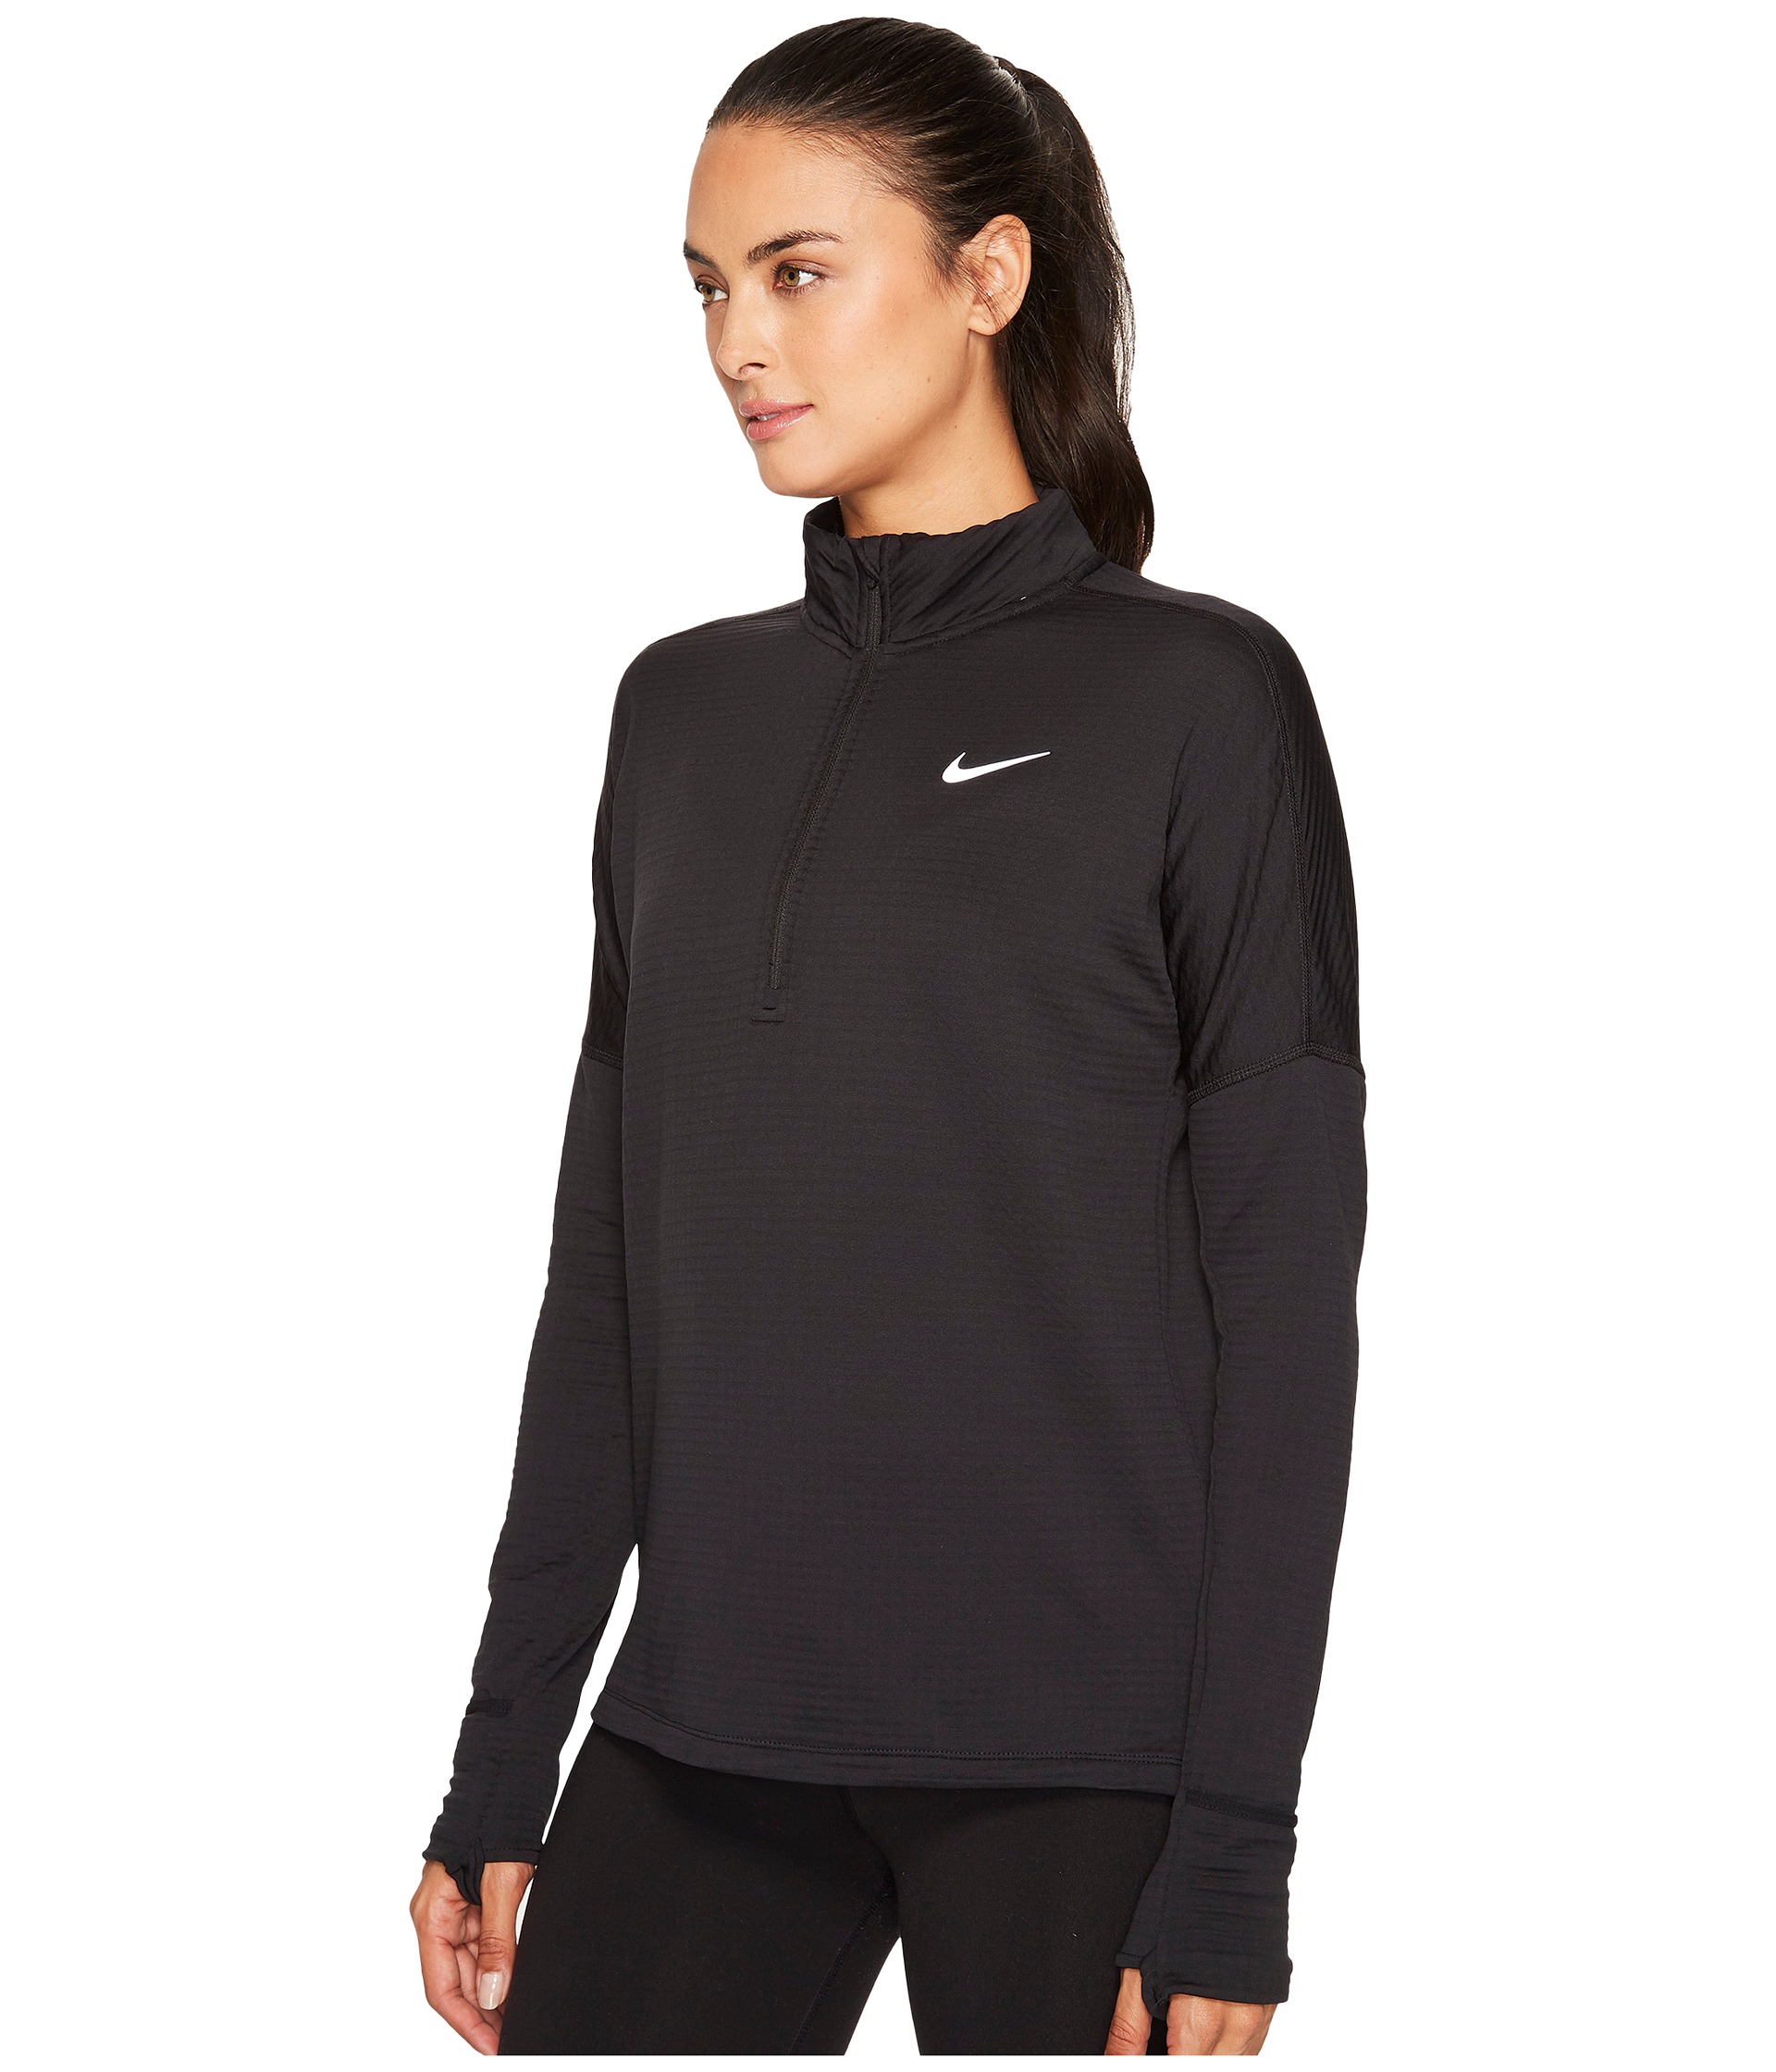 Nike Therma Sphere Element 1/2 Zip Running Top at Zappos.com